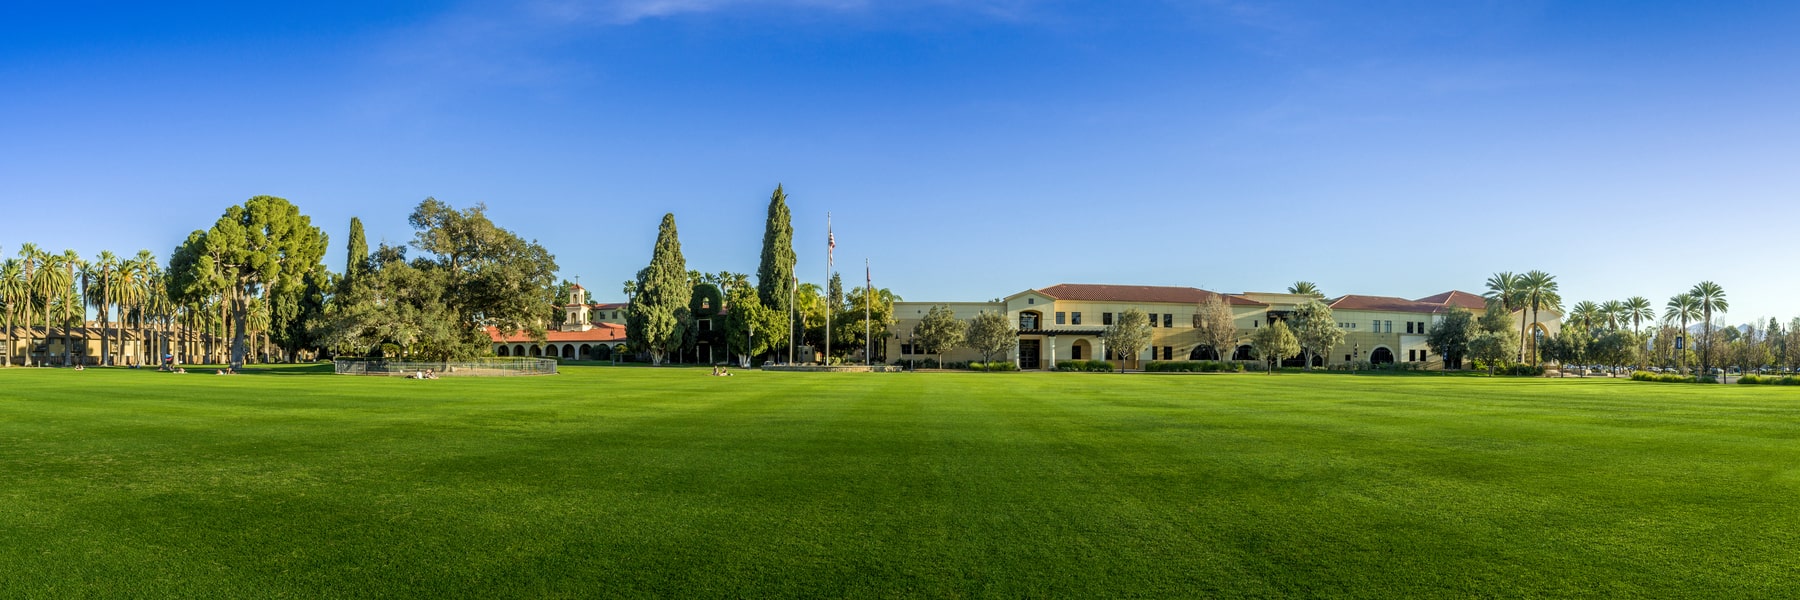 Front lawn of California Baptist Univeristy with campus buildings in the background